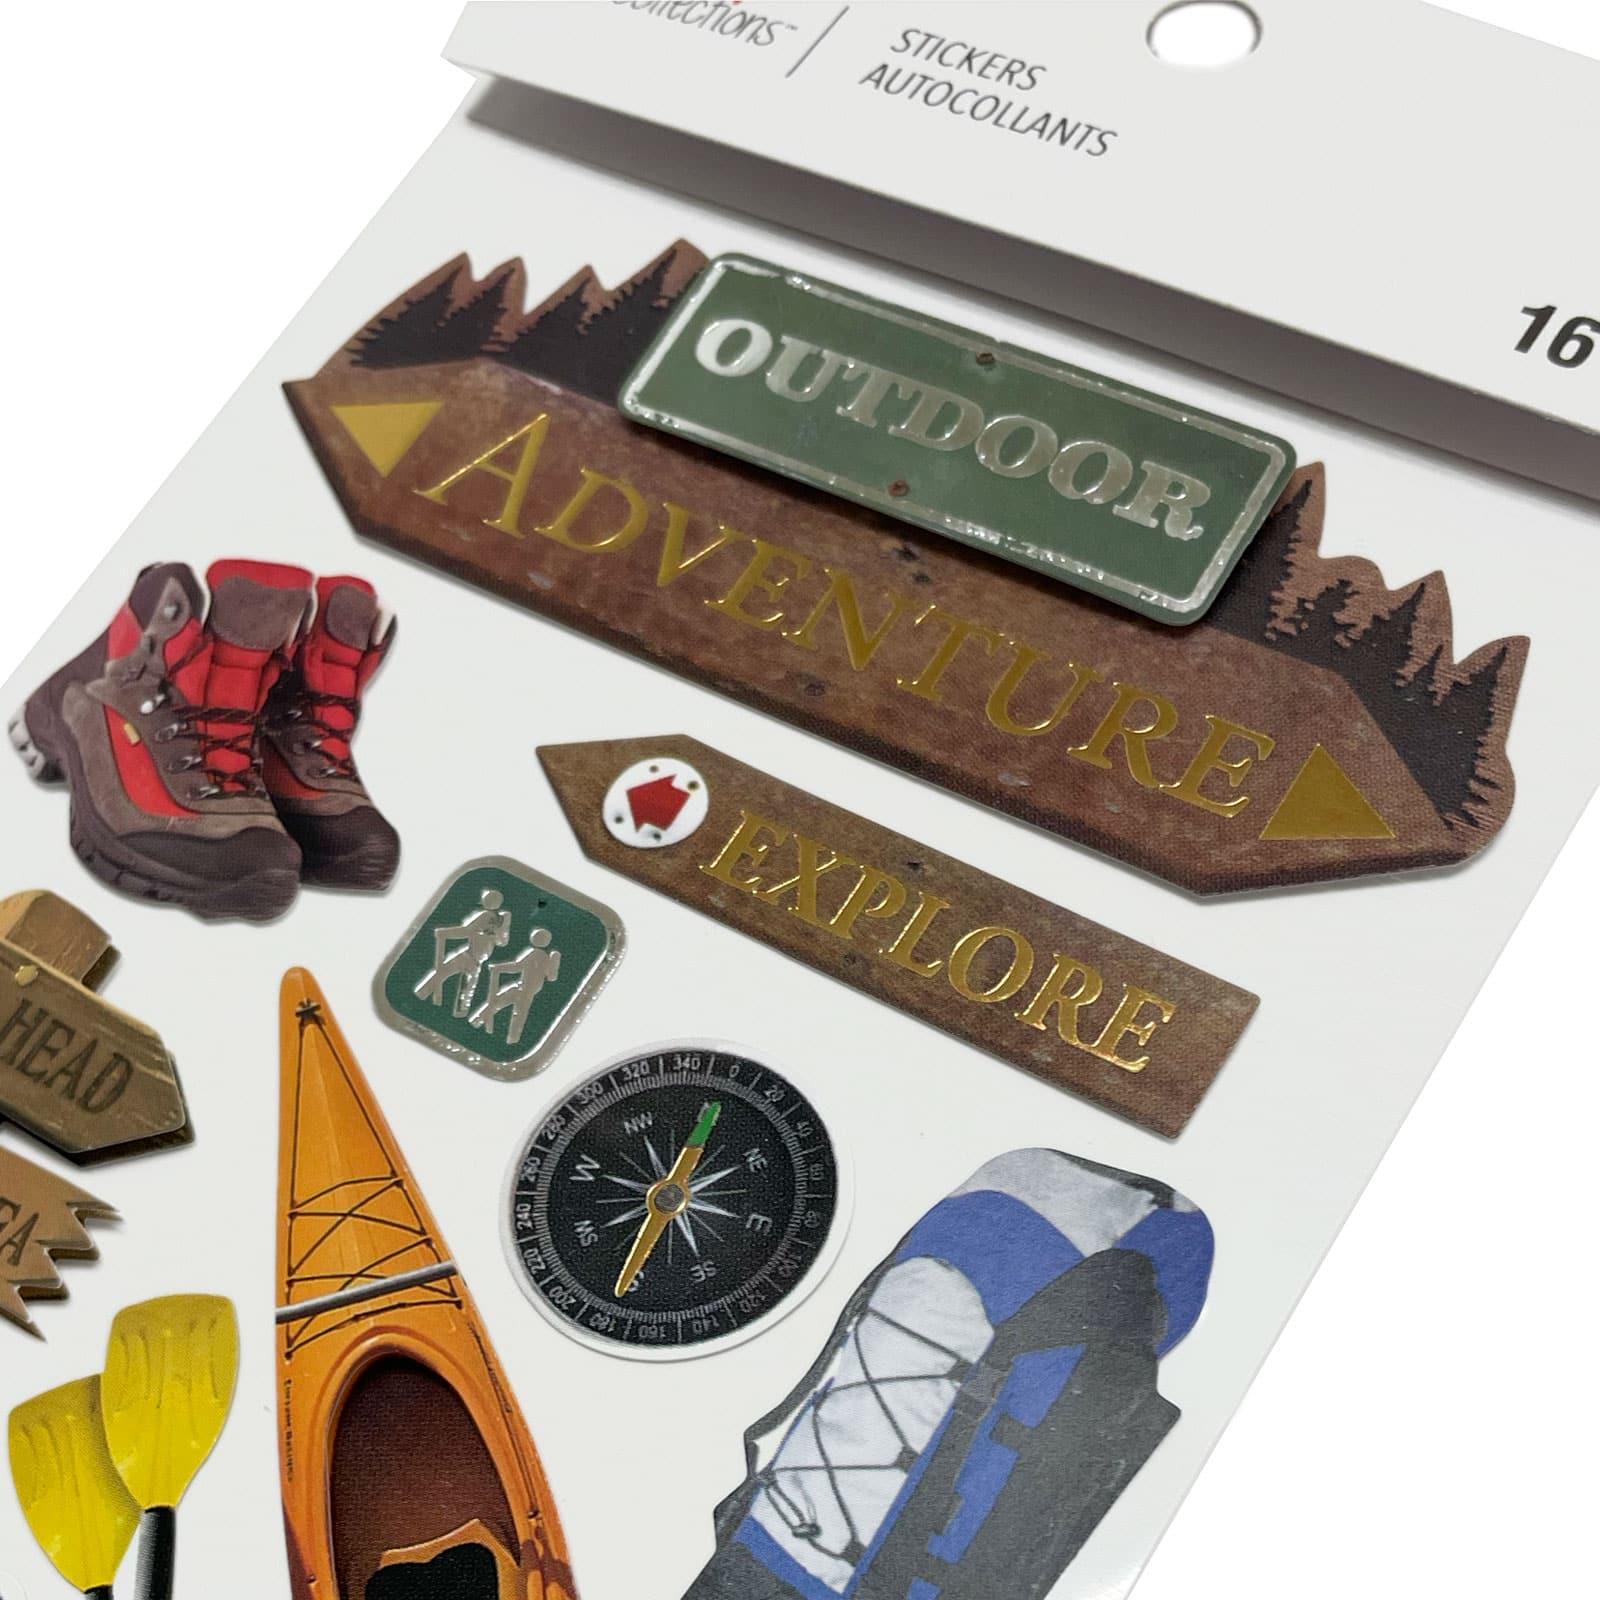 Outdoor Adventure Stickers by Recollection&#x2122;